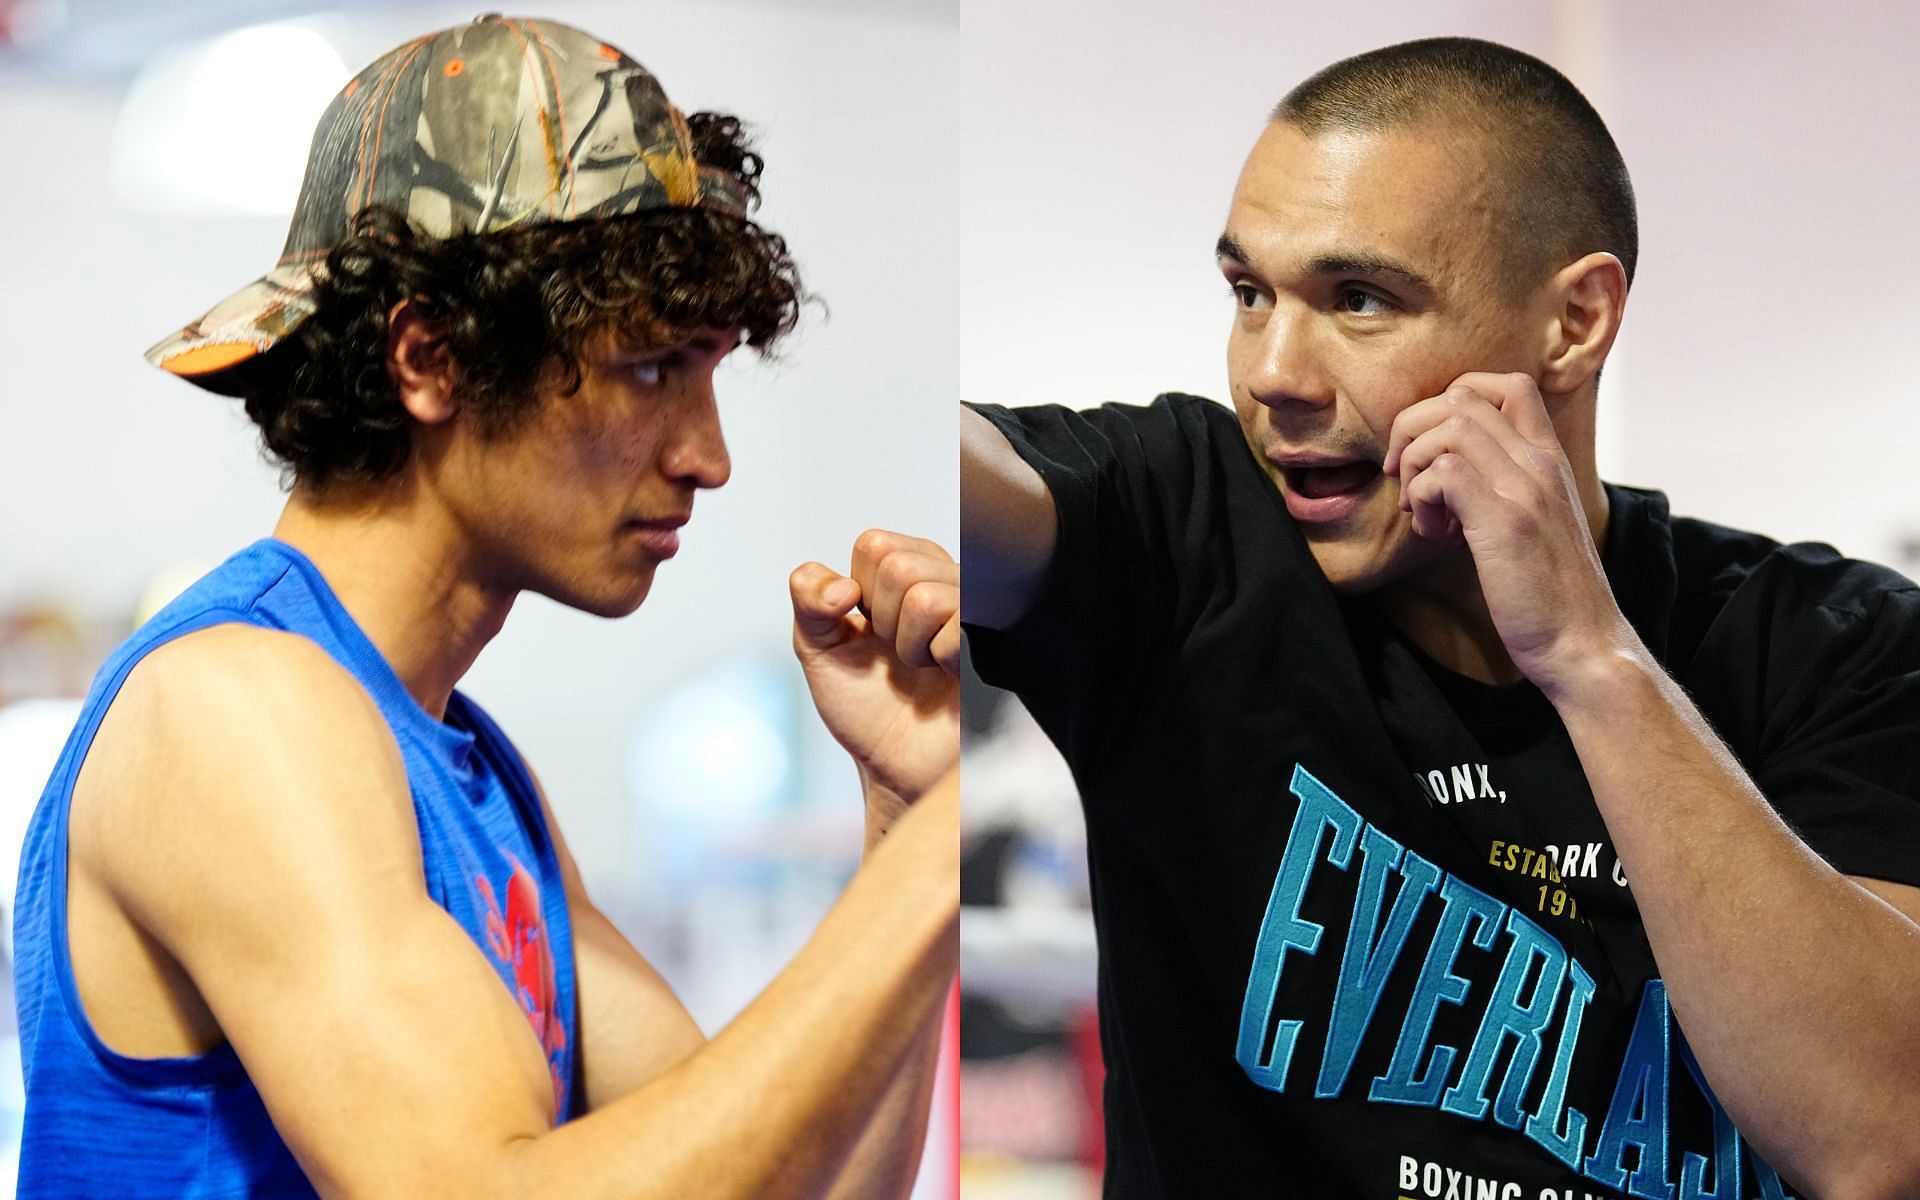 Sebastian Fundora (left) will look to shock the world by beating Tim Tszyu (right) on short notice [Images courtesy: Getty Images]